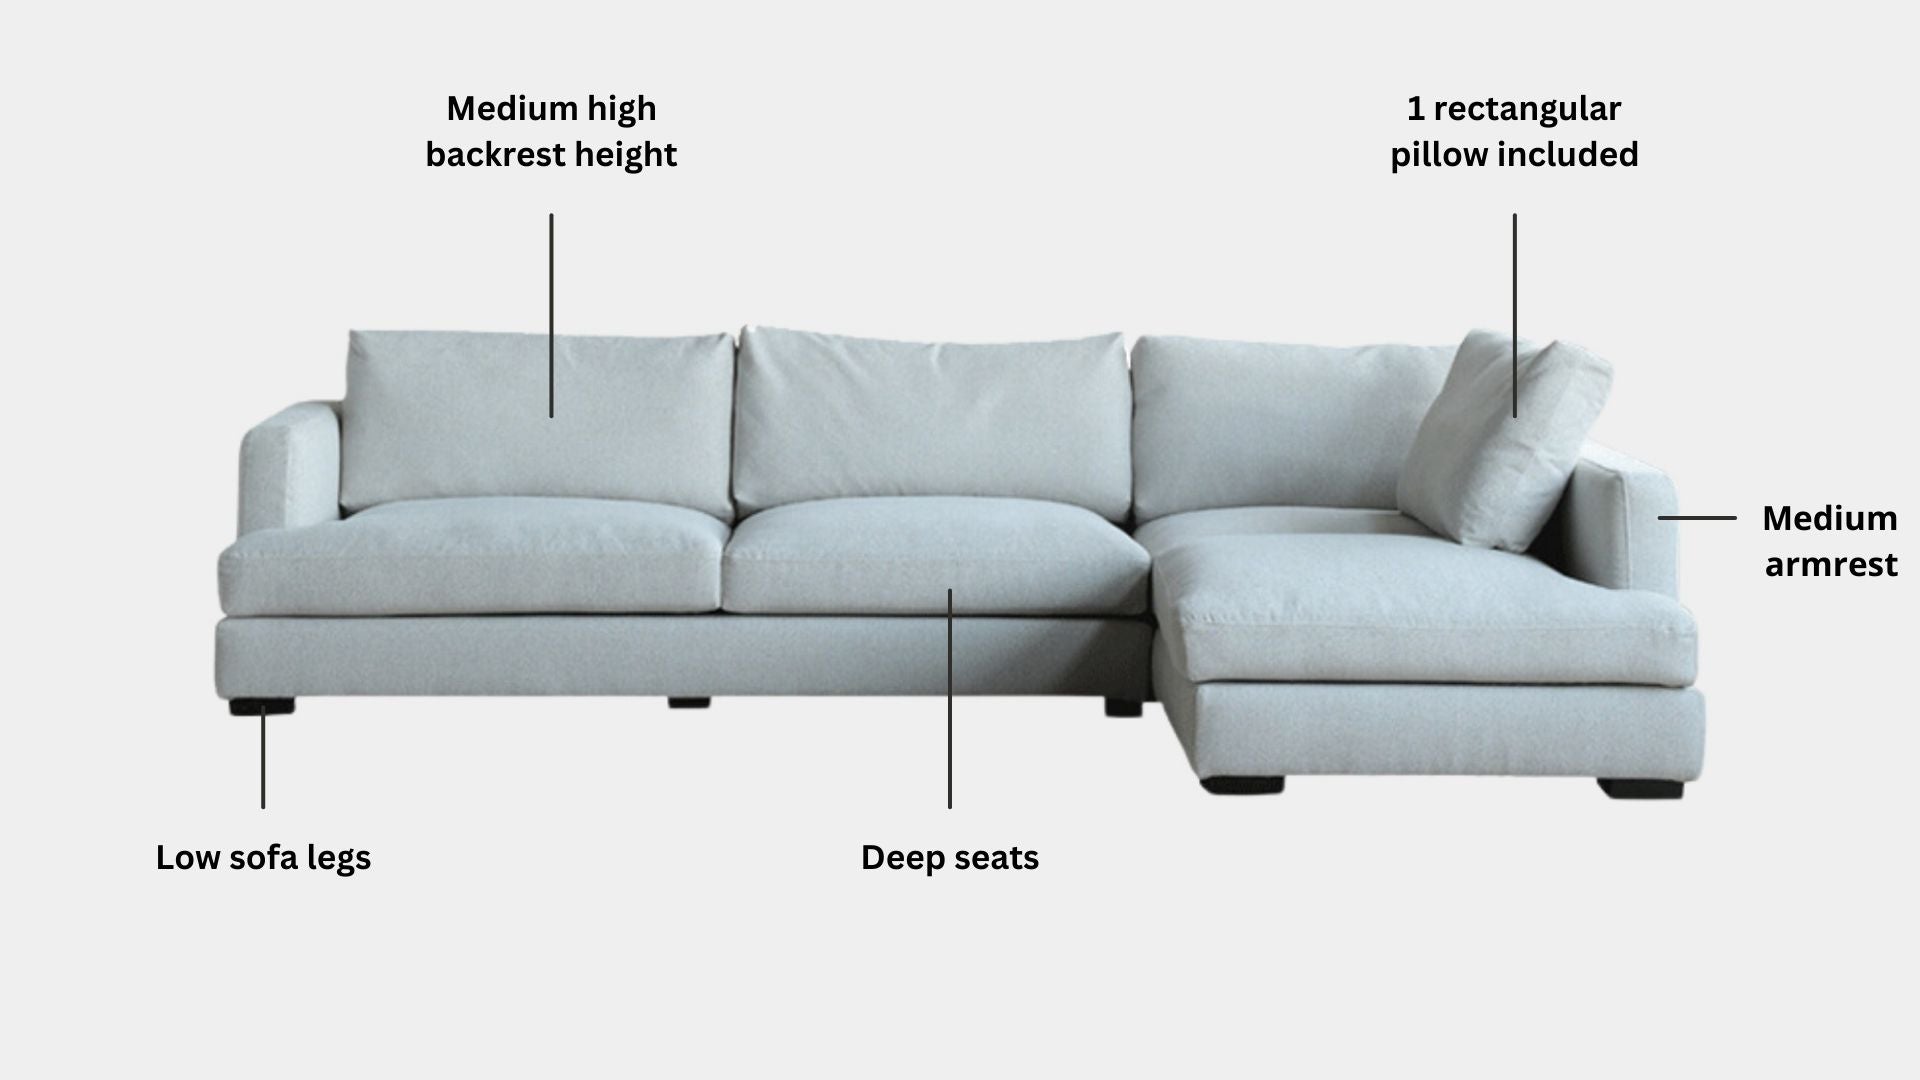 Key features such as armrest thickness, cushion height, seat depth and sofa leg height for Crescent Fabric Sectional Sofa